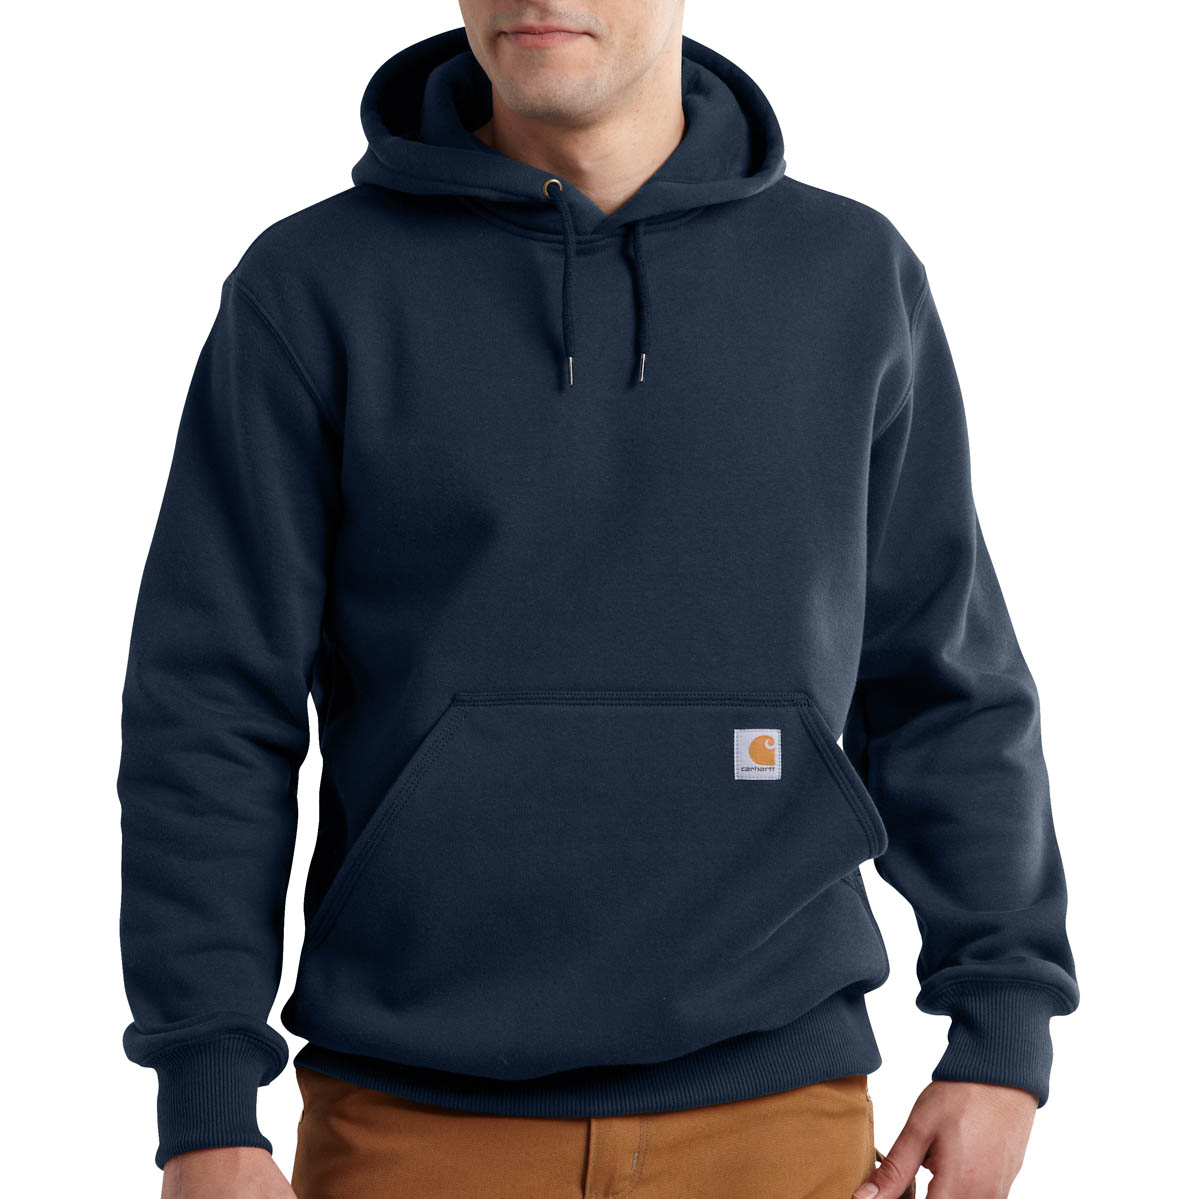 ALWAYSONE Mens Fleece Hooded Sweatshirt with Pocket Casual Athletic Pullover Hoodie Size S-3XL 